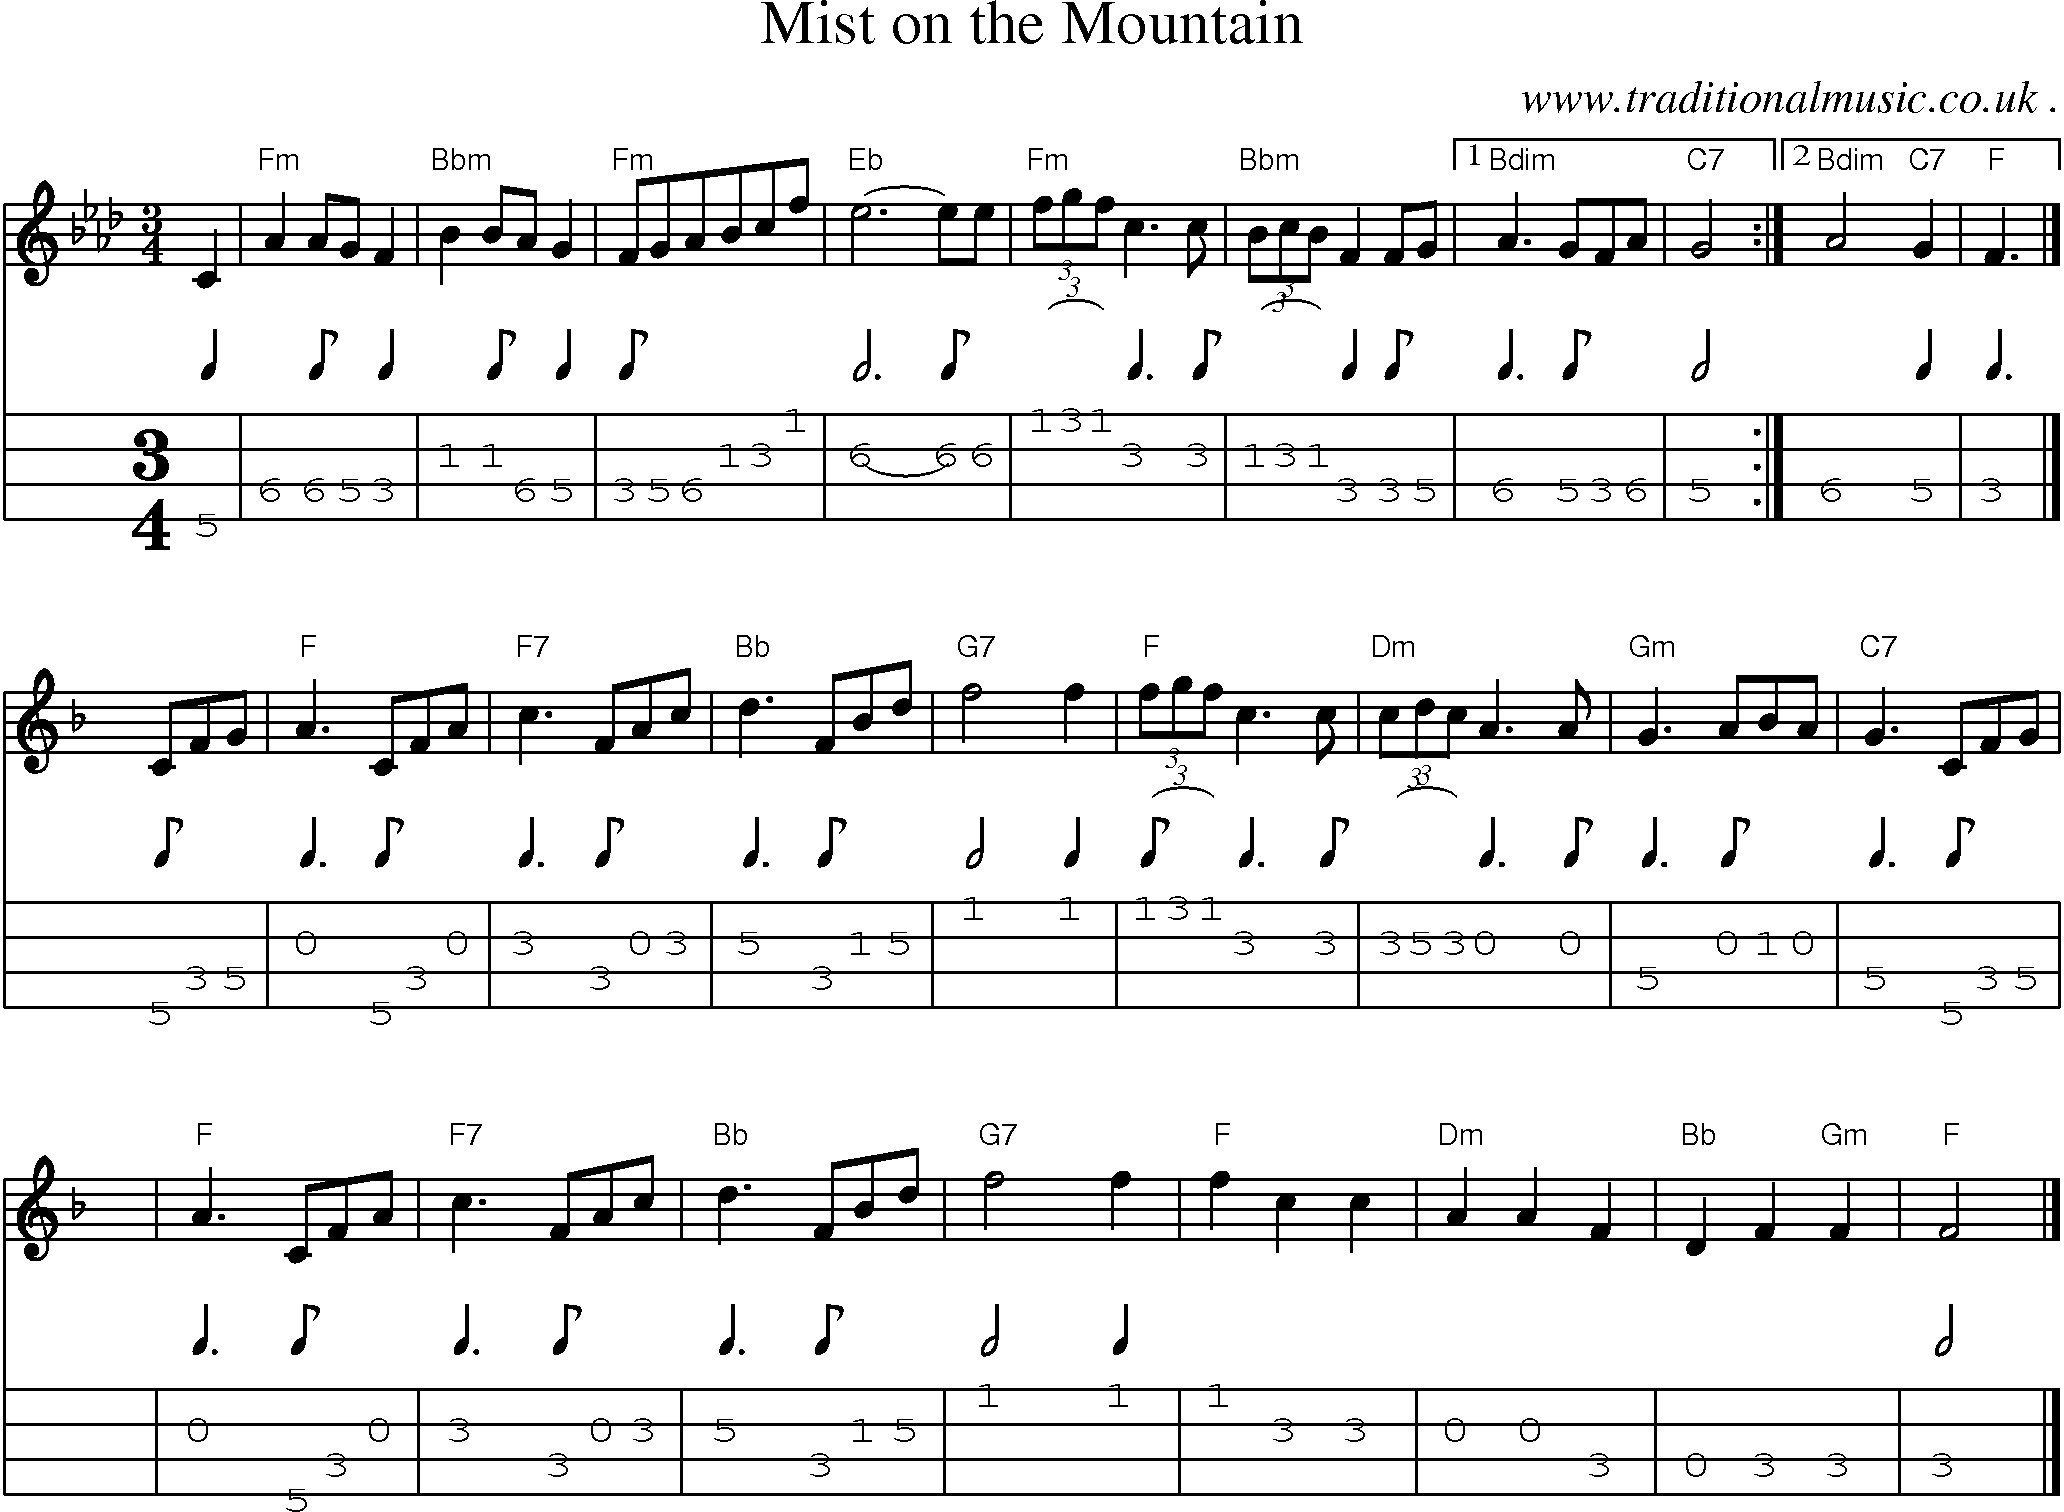 Sheet-music  score, Chords and Mandolin Tabs for Mist On The Mountain